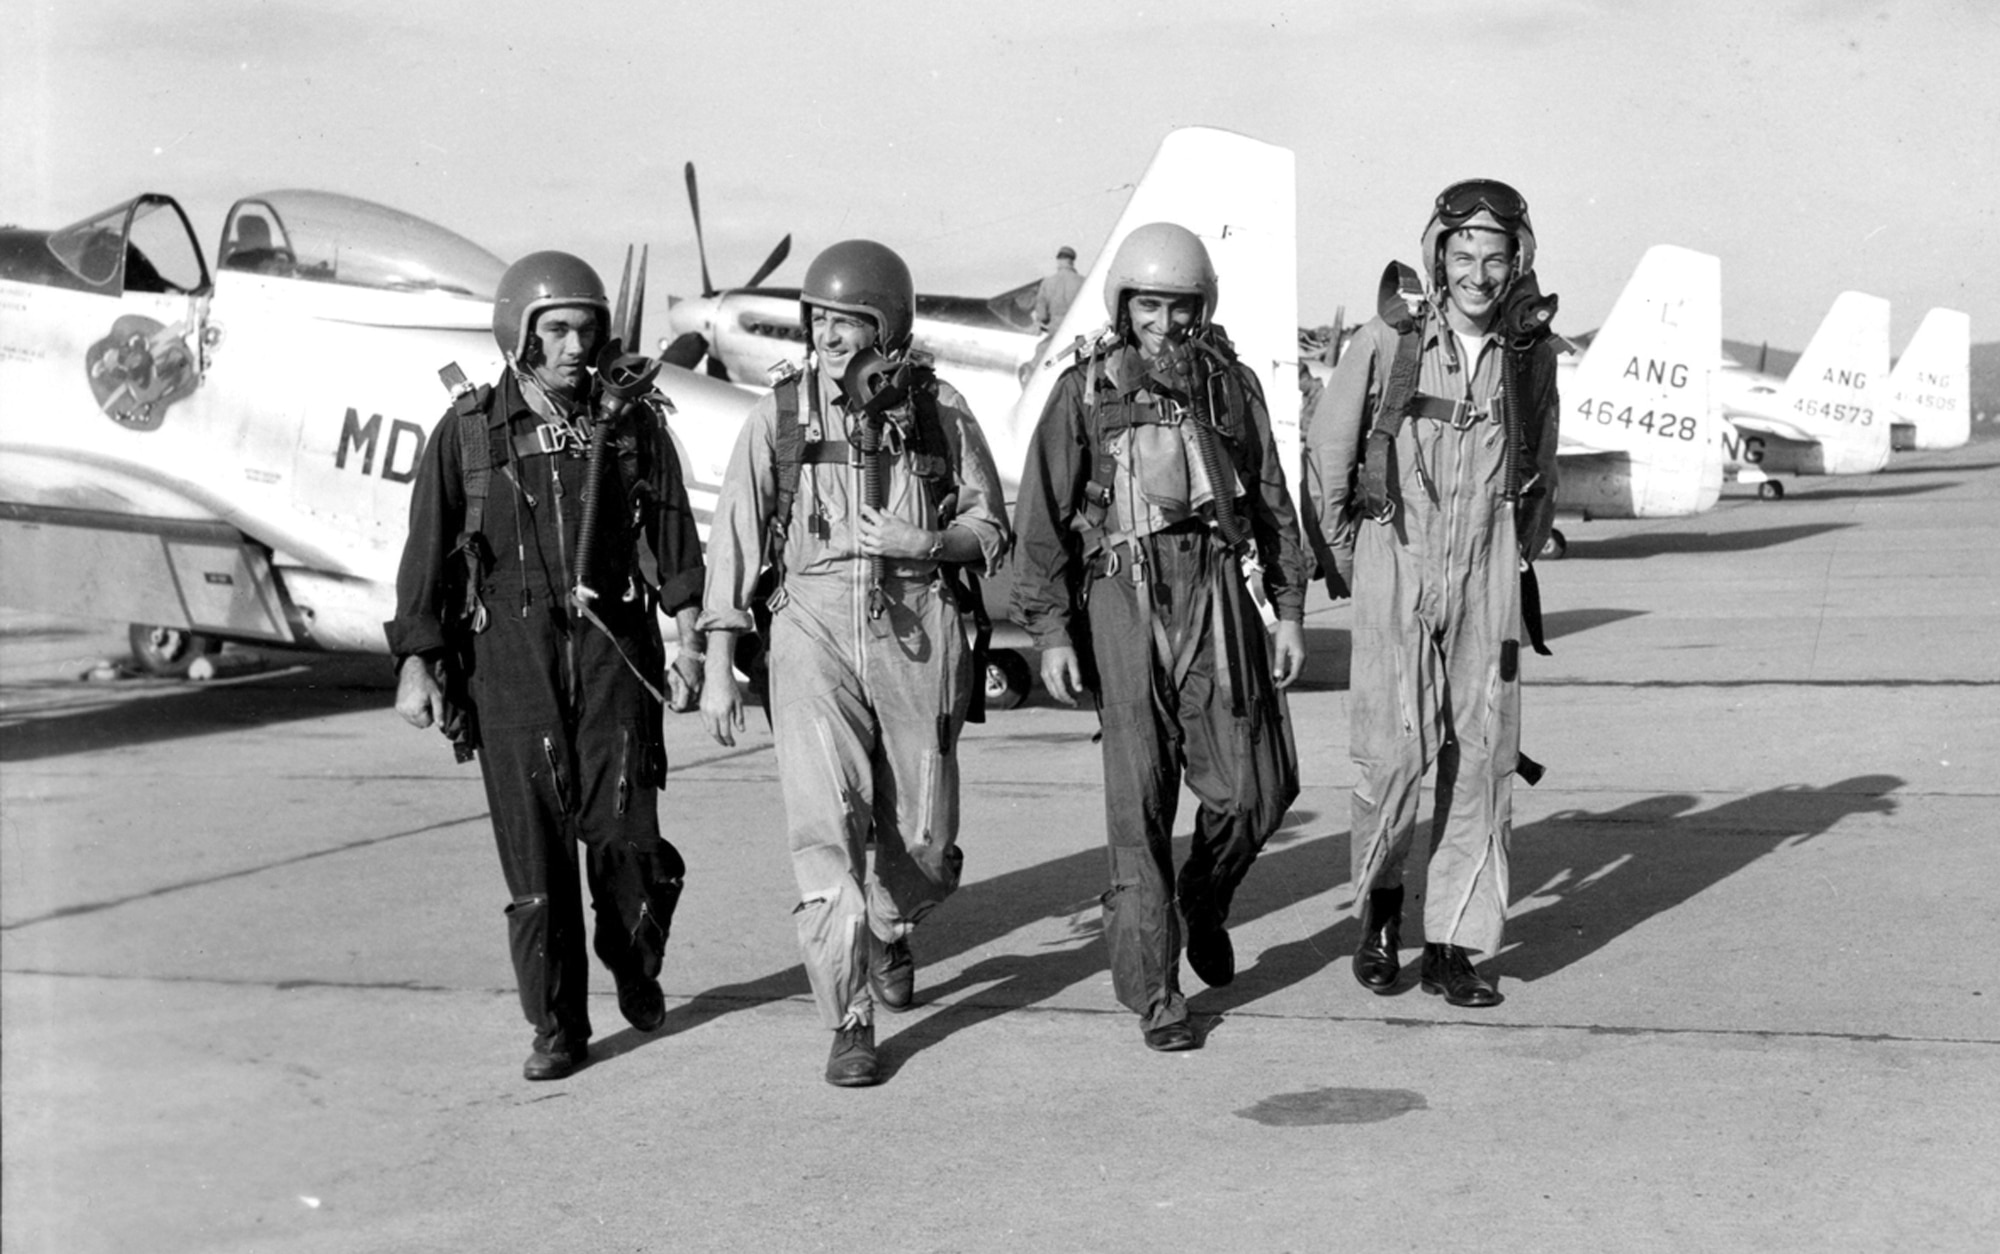 (Left to right) Guardian Angels pilots Capt. John F.R. Scott, 1st Lt. Malcolm Henry, 1st Lt. Bill Marriott and Capt. Jesse Mitchell on the flight line at Spaatz Field in Reading, Pa., following an airshow at Fort Indiantown Gap, Pa., in 1952. The Guardian Angels, a Maryland Air National Guard aerial demonstration team, flew from 1952 to 1953. (Released)